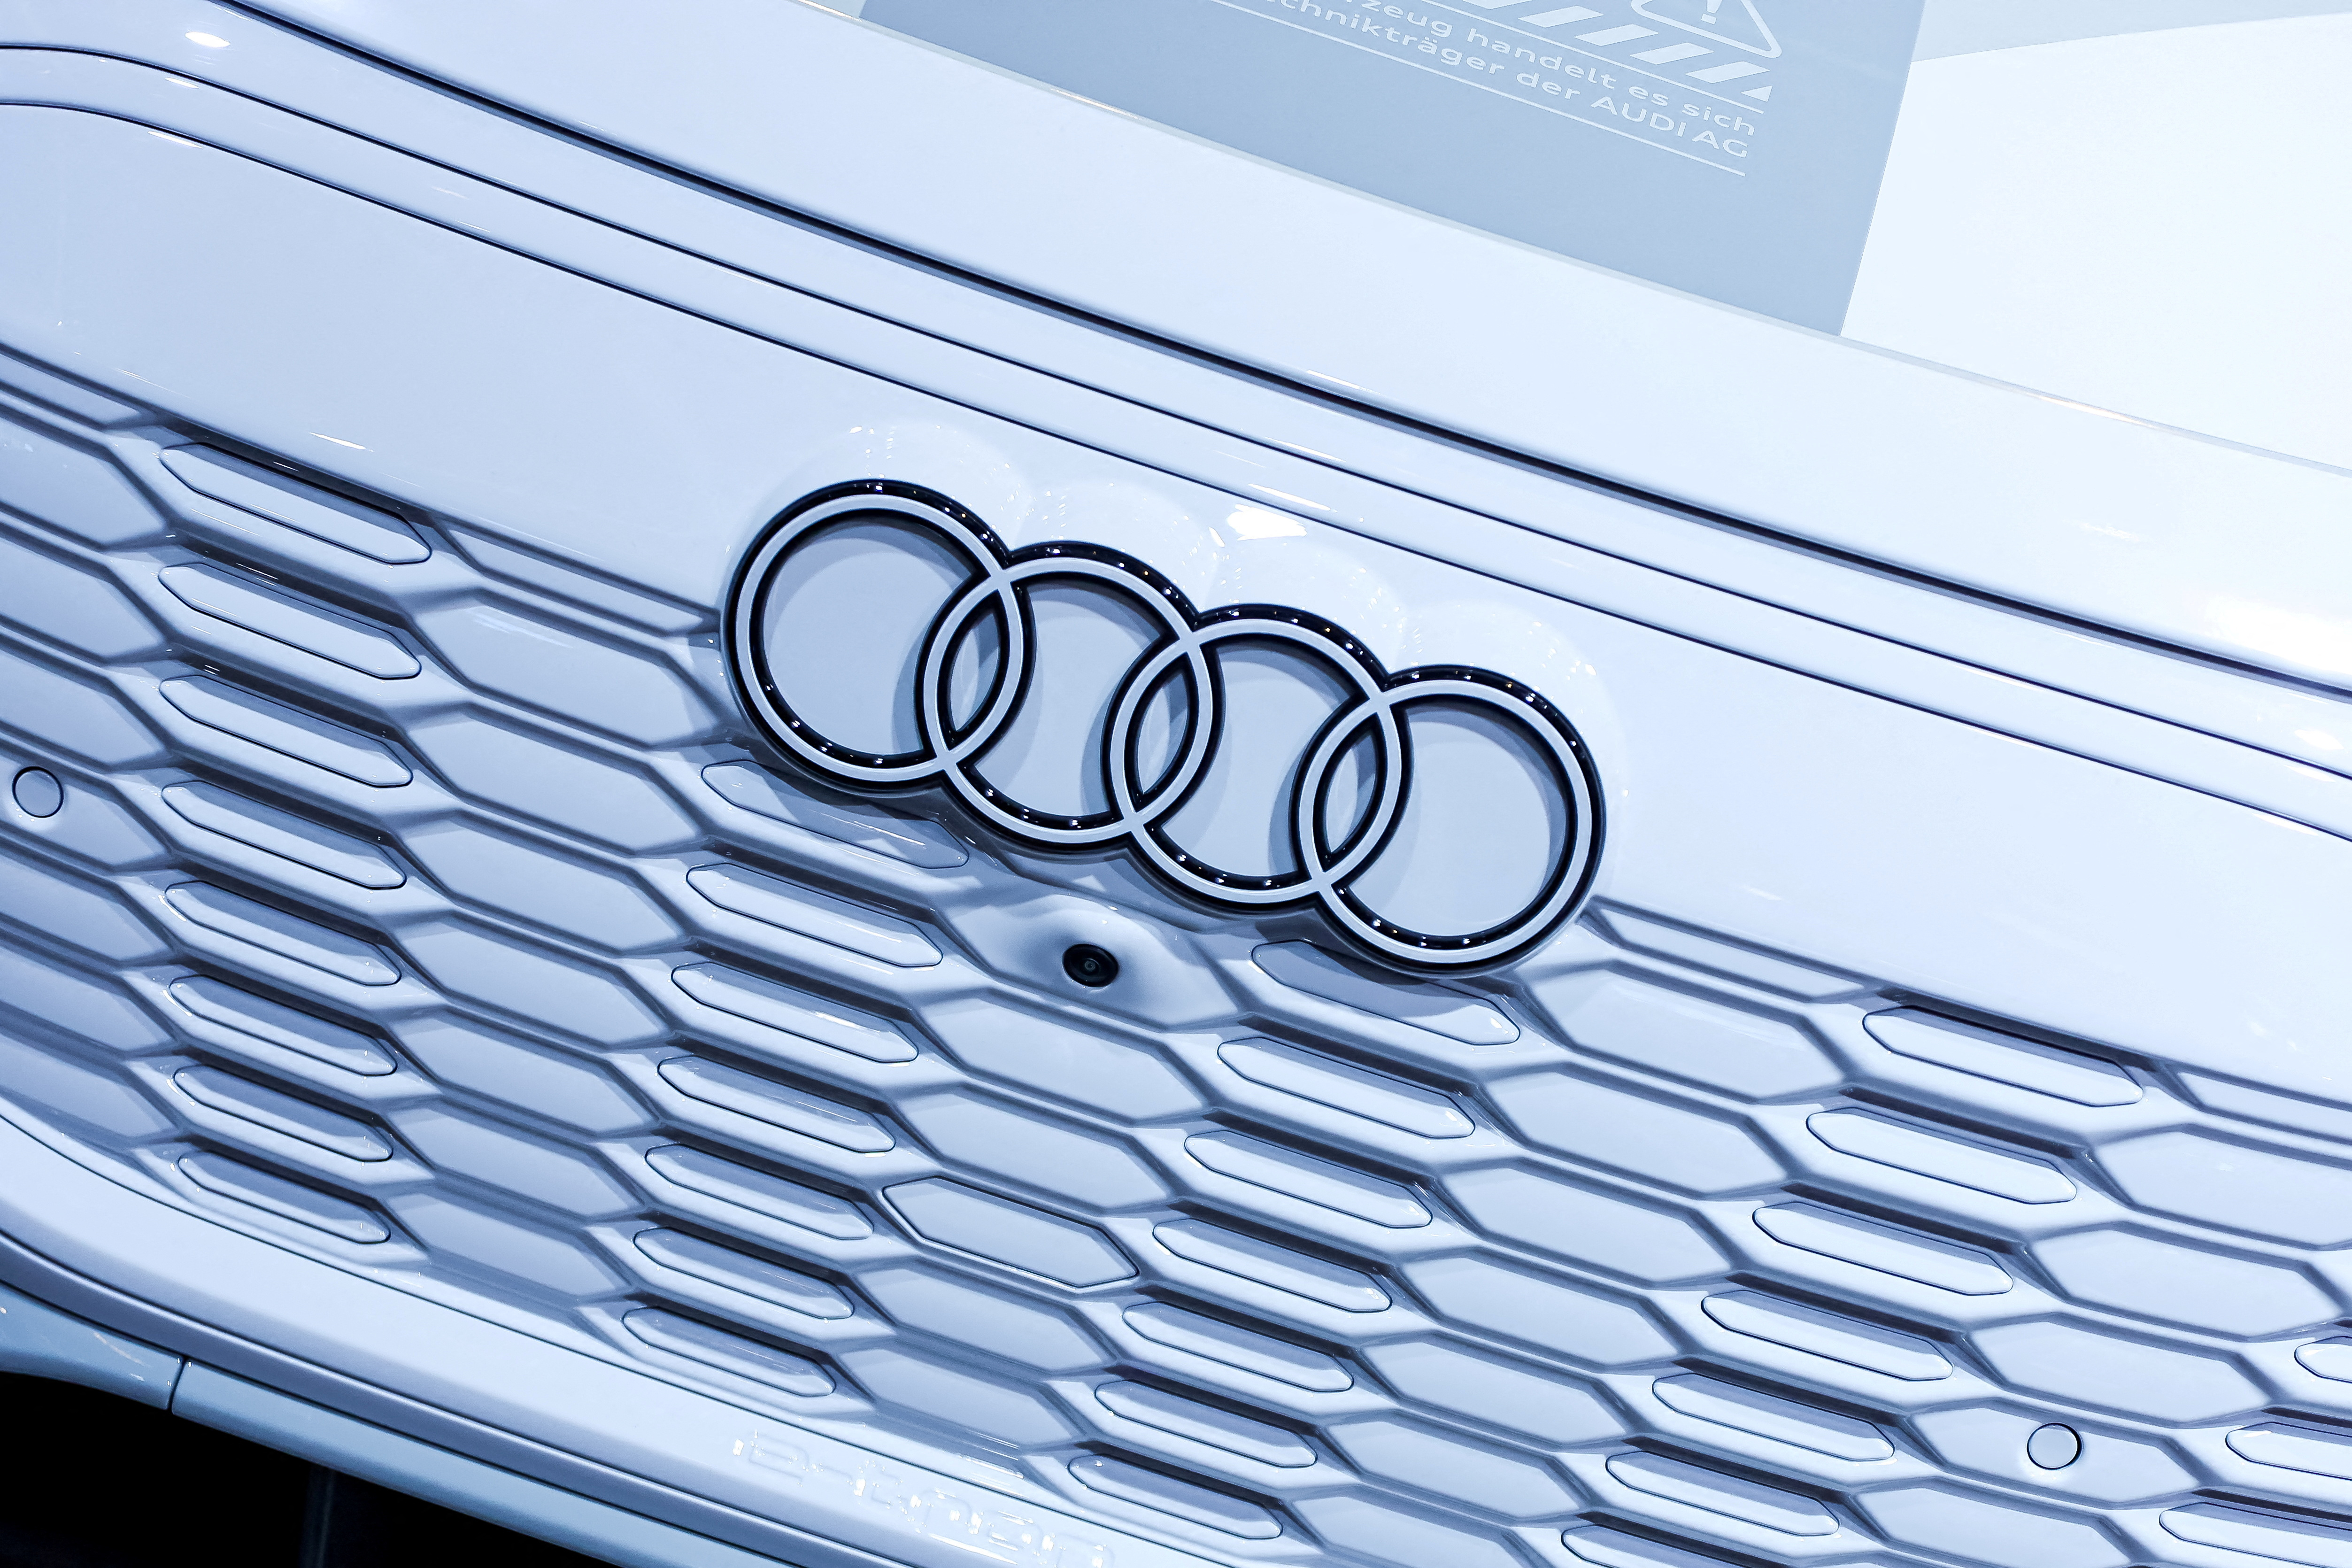 The four circles overlapping represent the merging of brands Audi, DKW, Horch and Wanderer